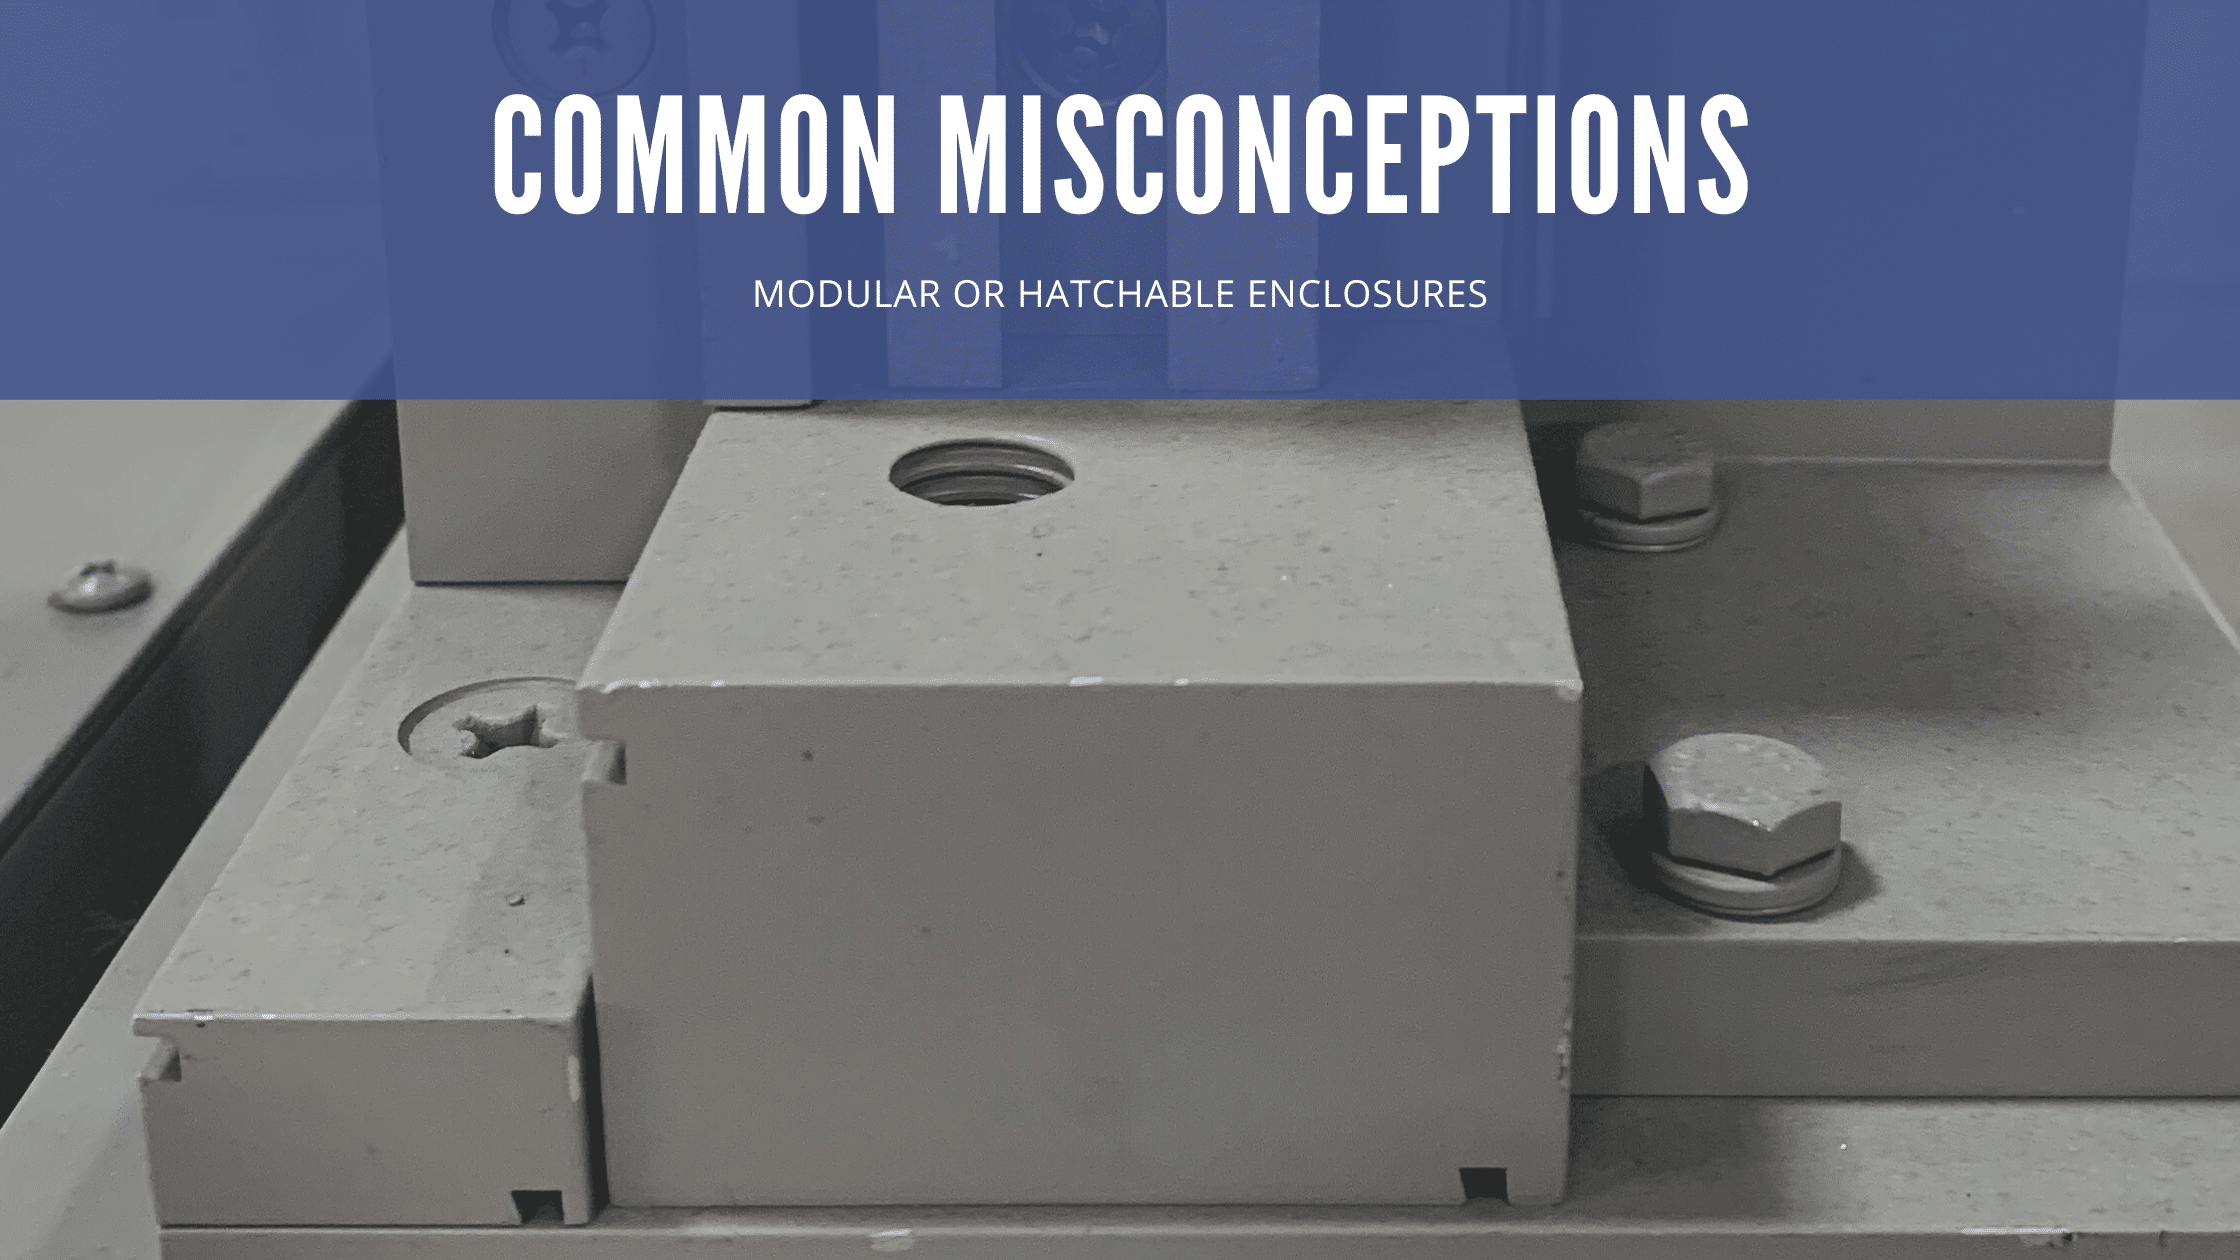 Common Misconceptions of Modular Enclosures